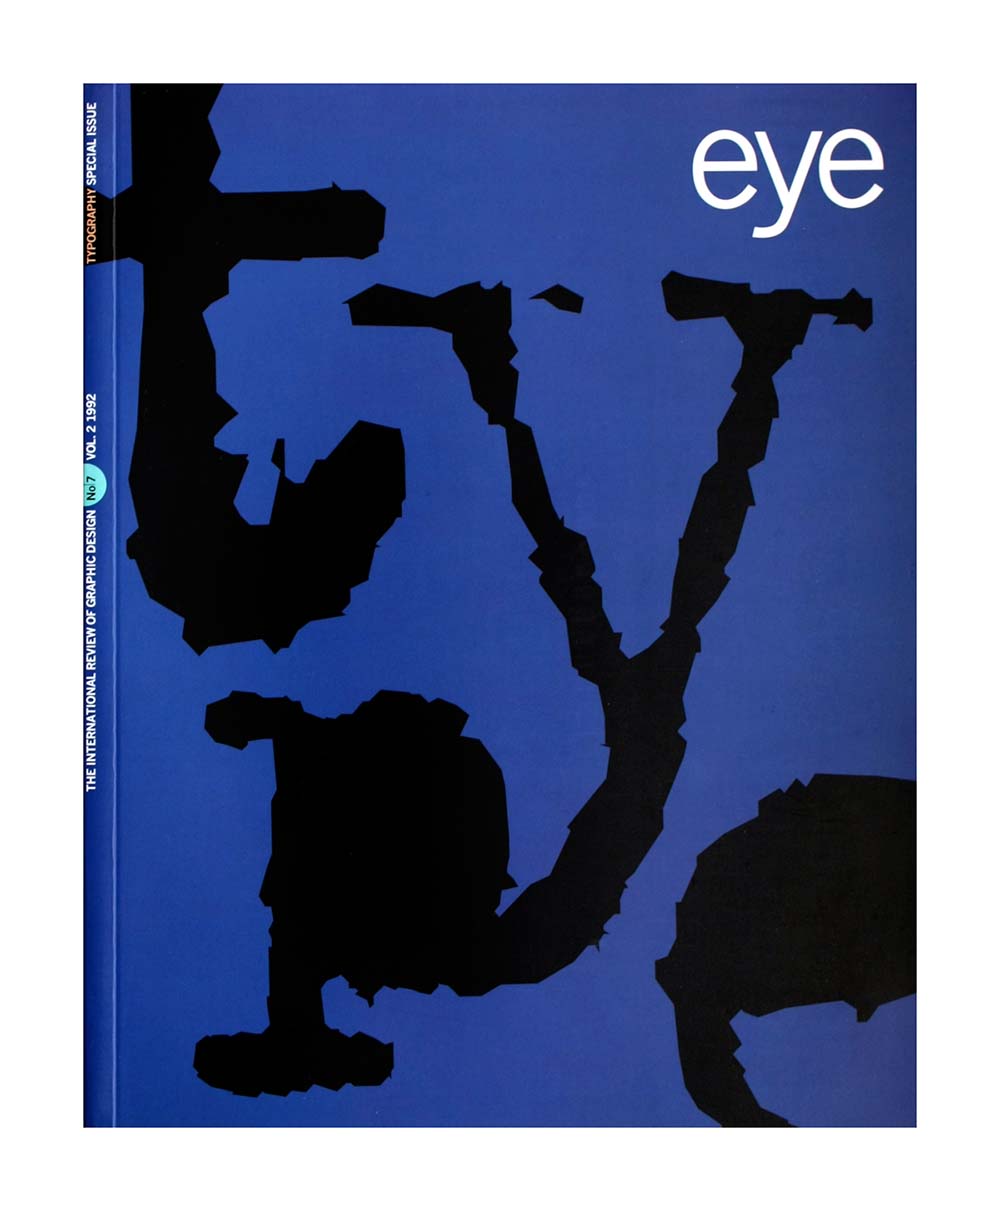 Cover of Eye, No. 7 Vol. 2, 1992. Darkblue background with the letters t y p e in LTR NCND. Design: Stephen Coates.